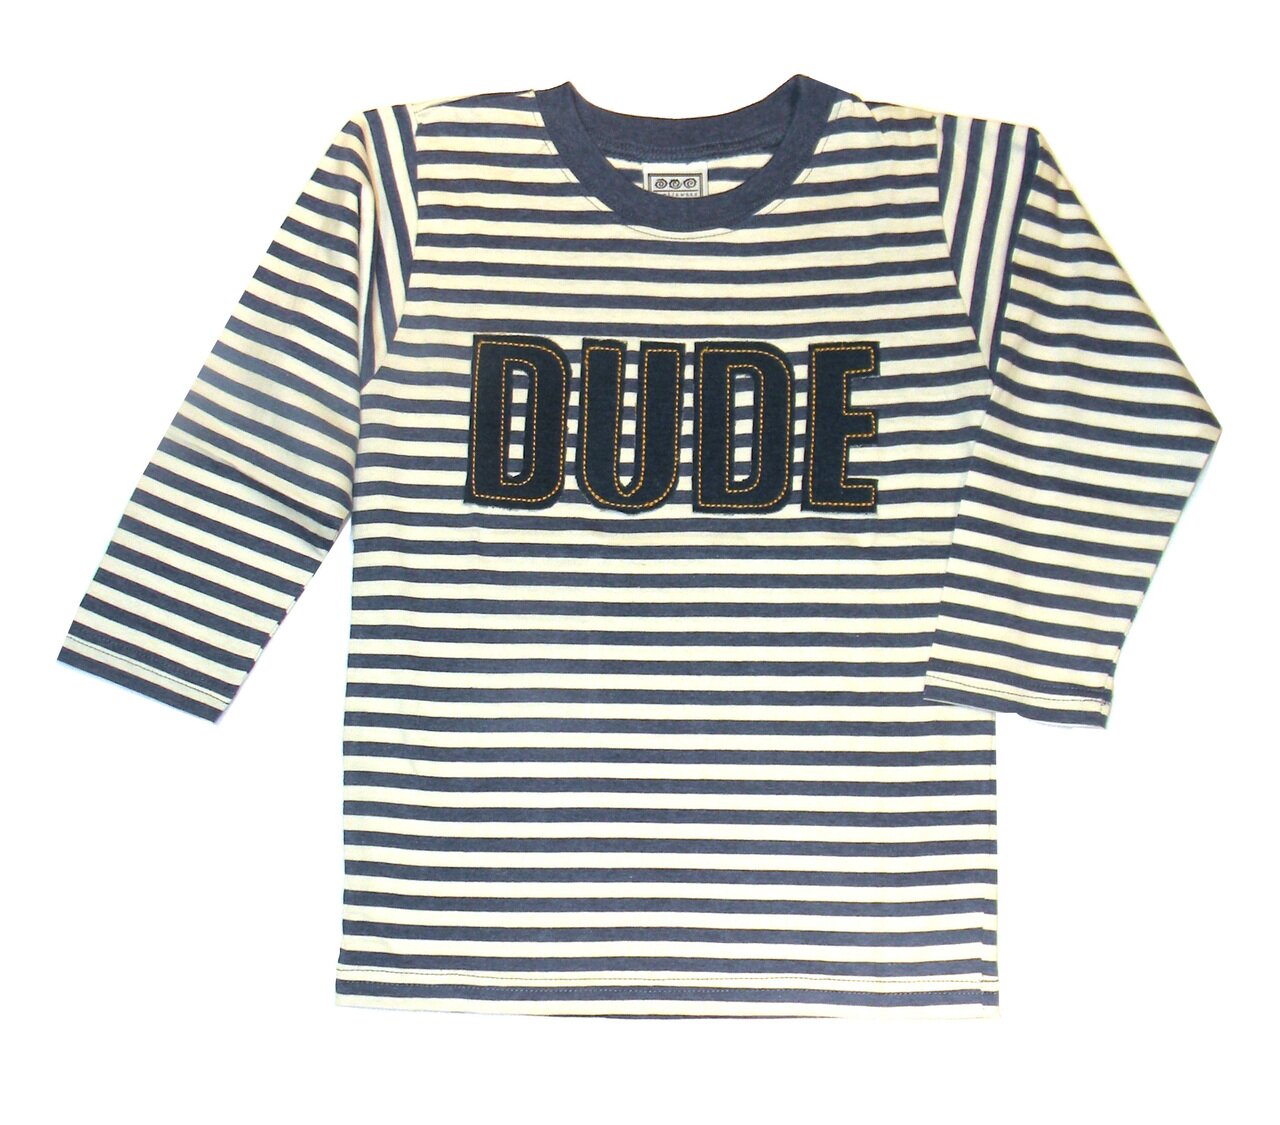 Boys' Striped Dude Shirt by Tumbleweed (Size: 5)